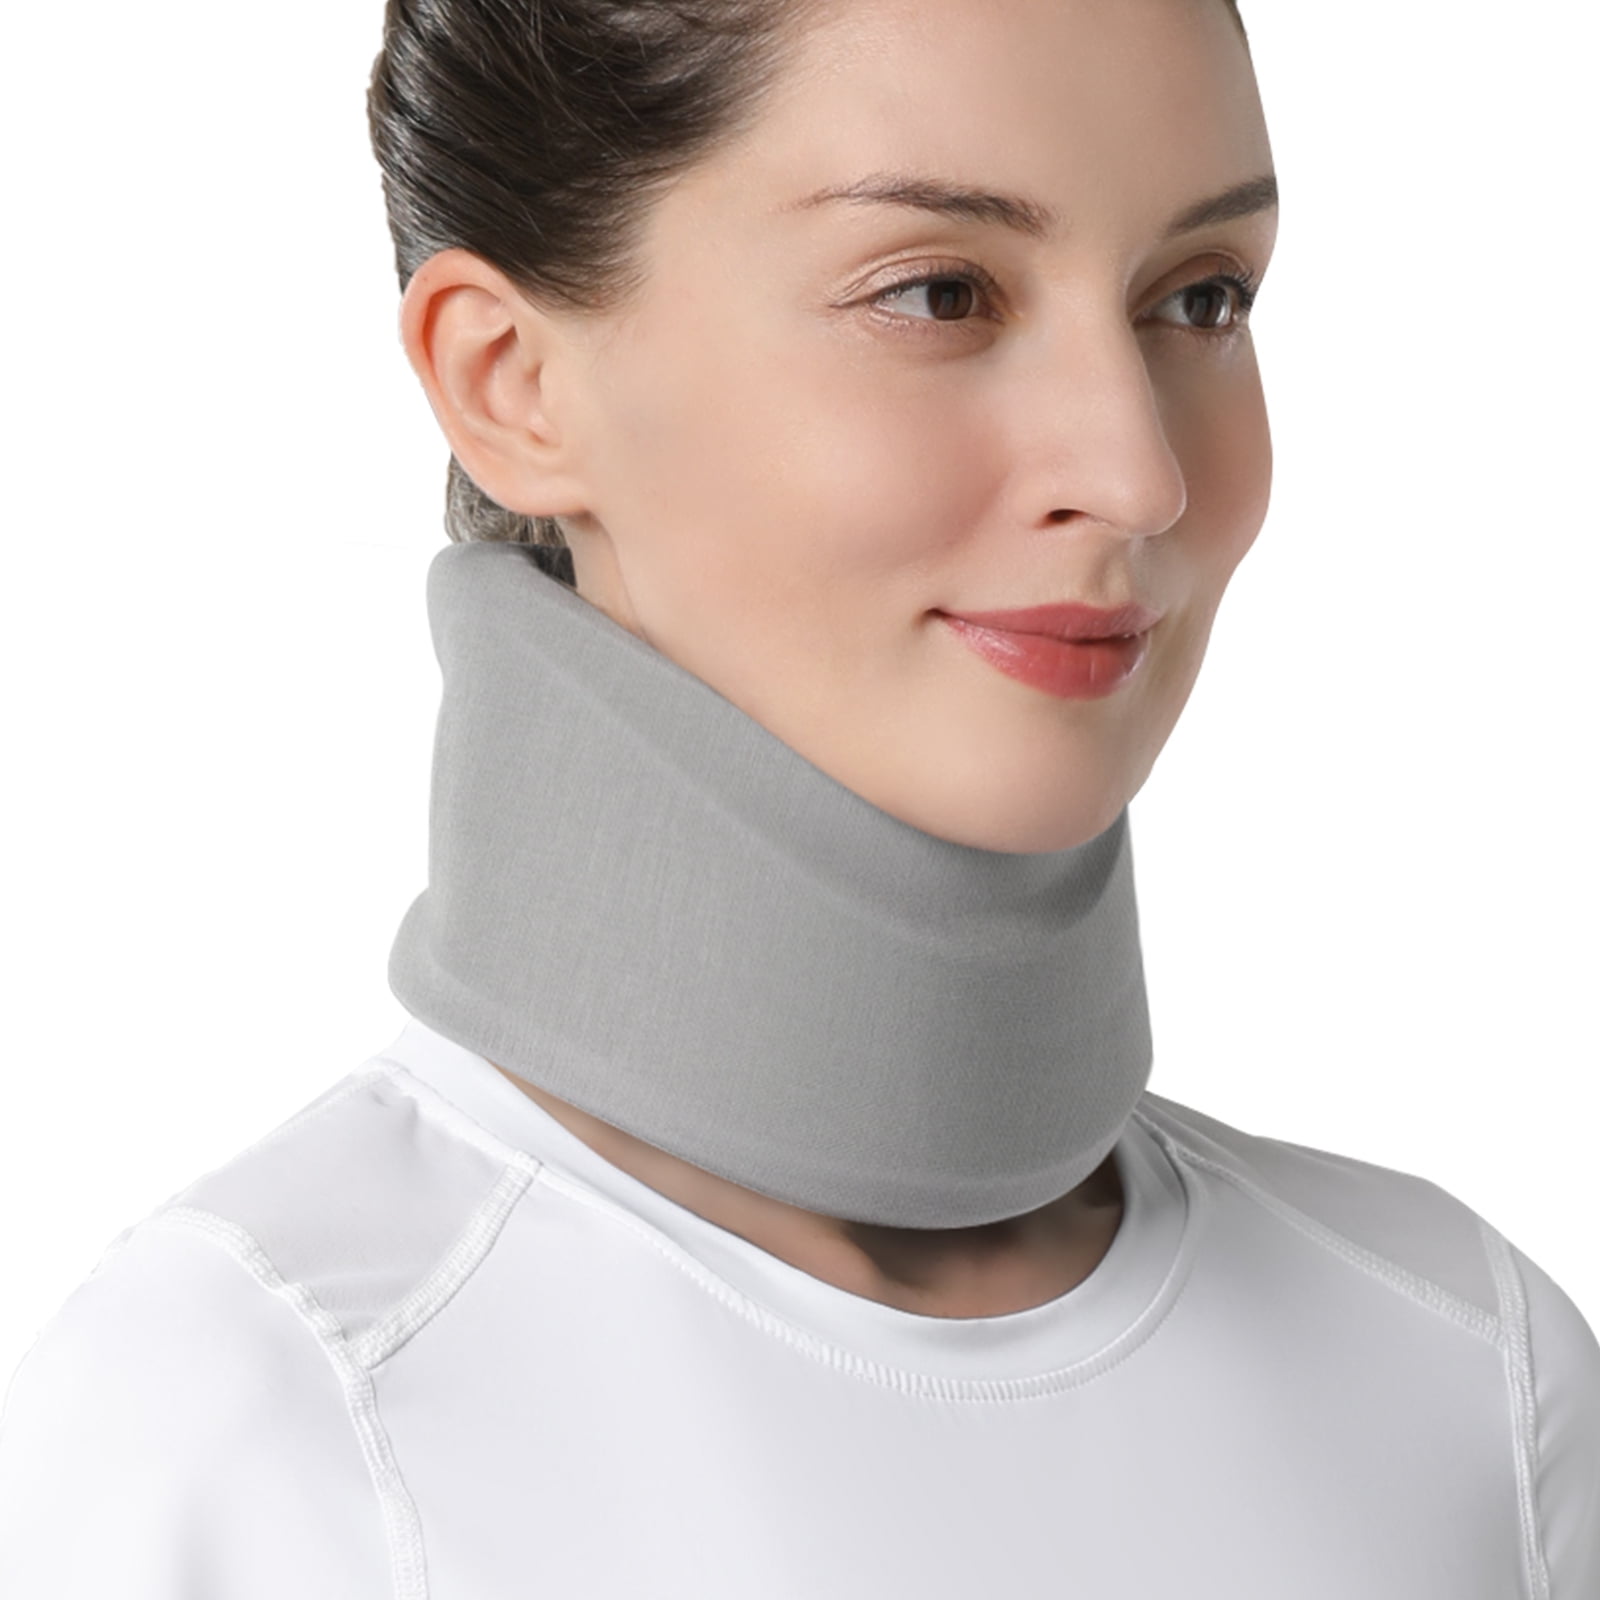 VELPEAU Neck Brace for Neck Pain and Support - Soft Cervical Collar for ...